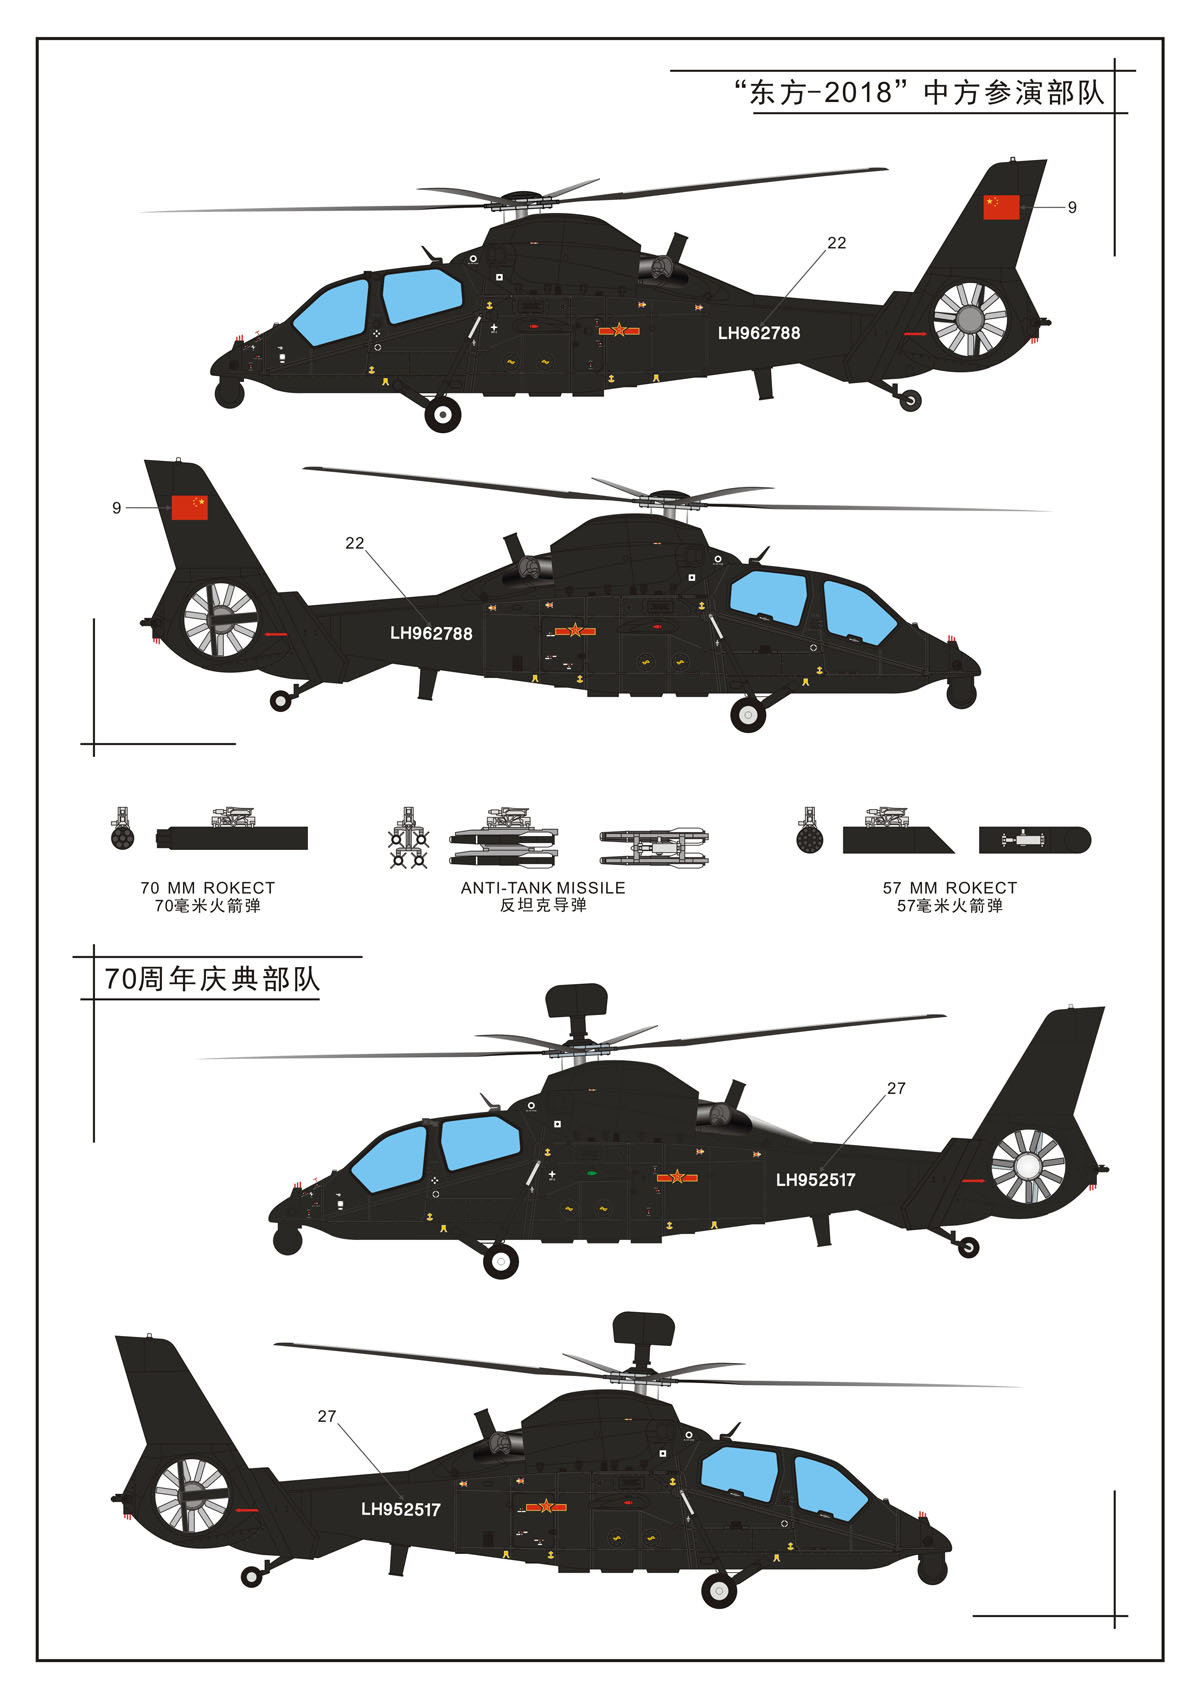 1/72 PLA Army Z-19 "Black Whirlwind" Attack Helicopter - Click Image to Close